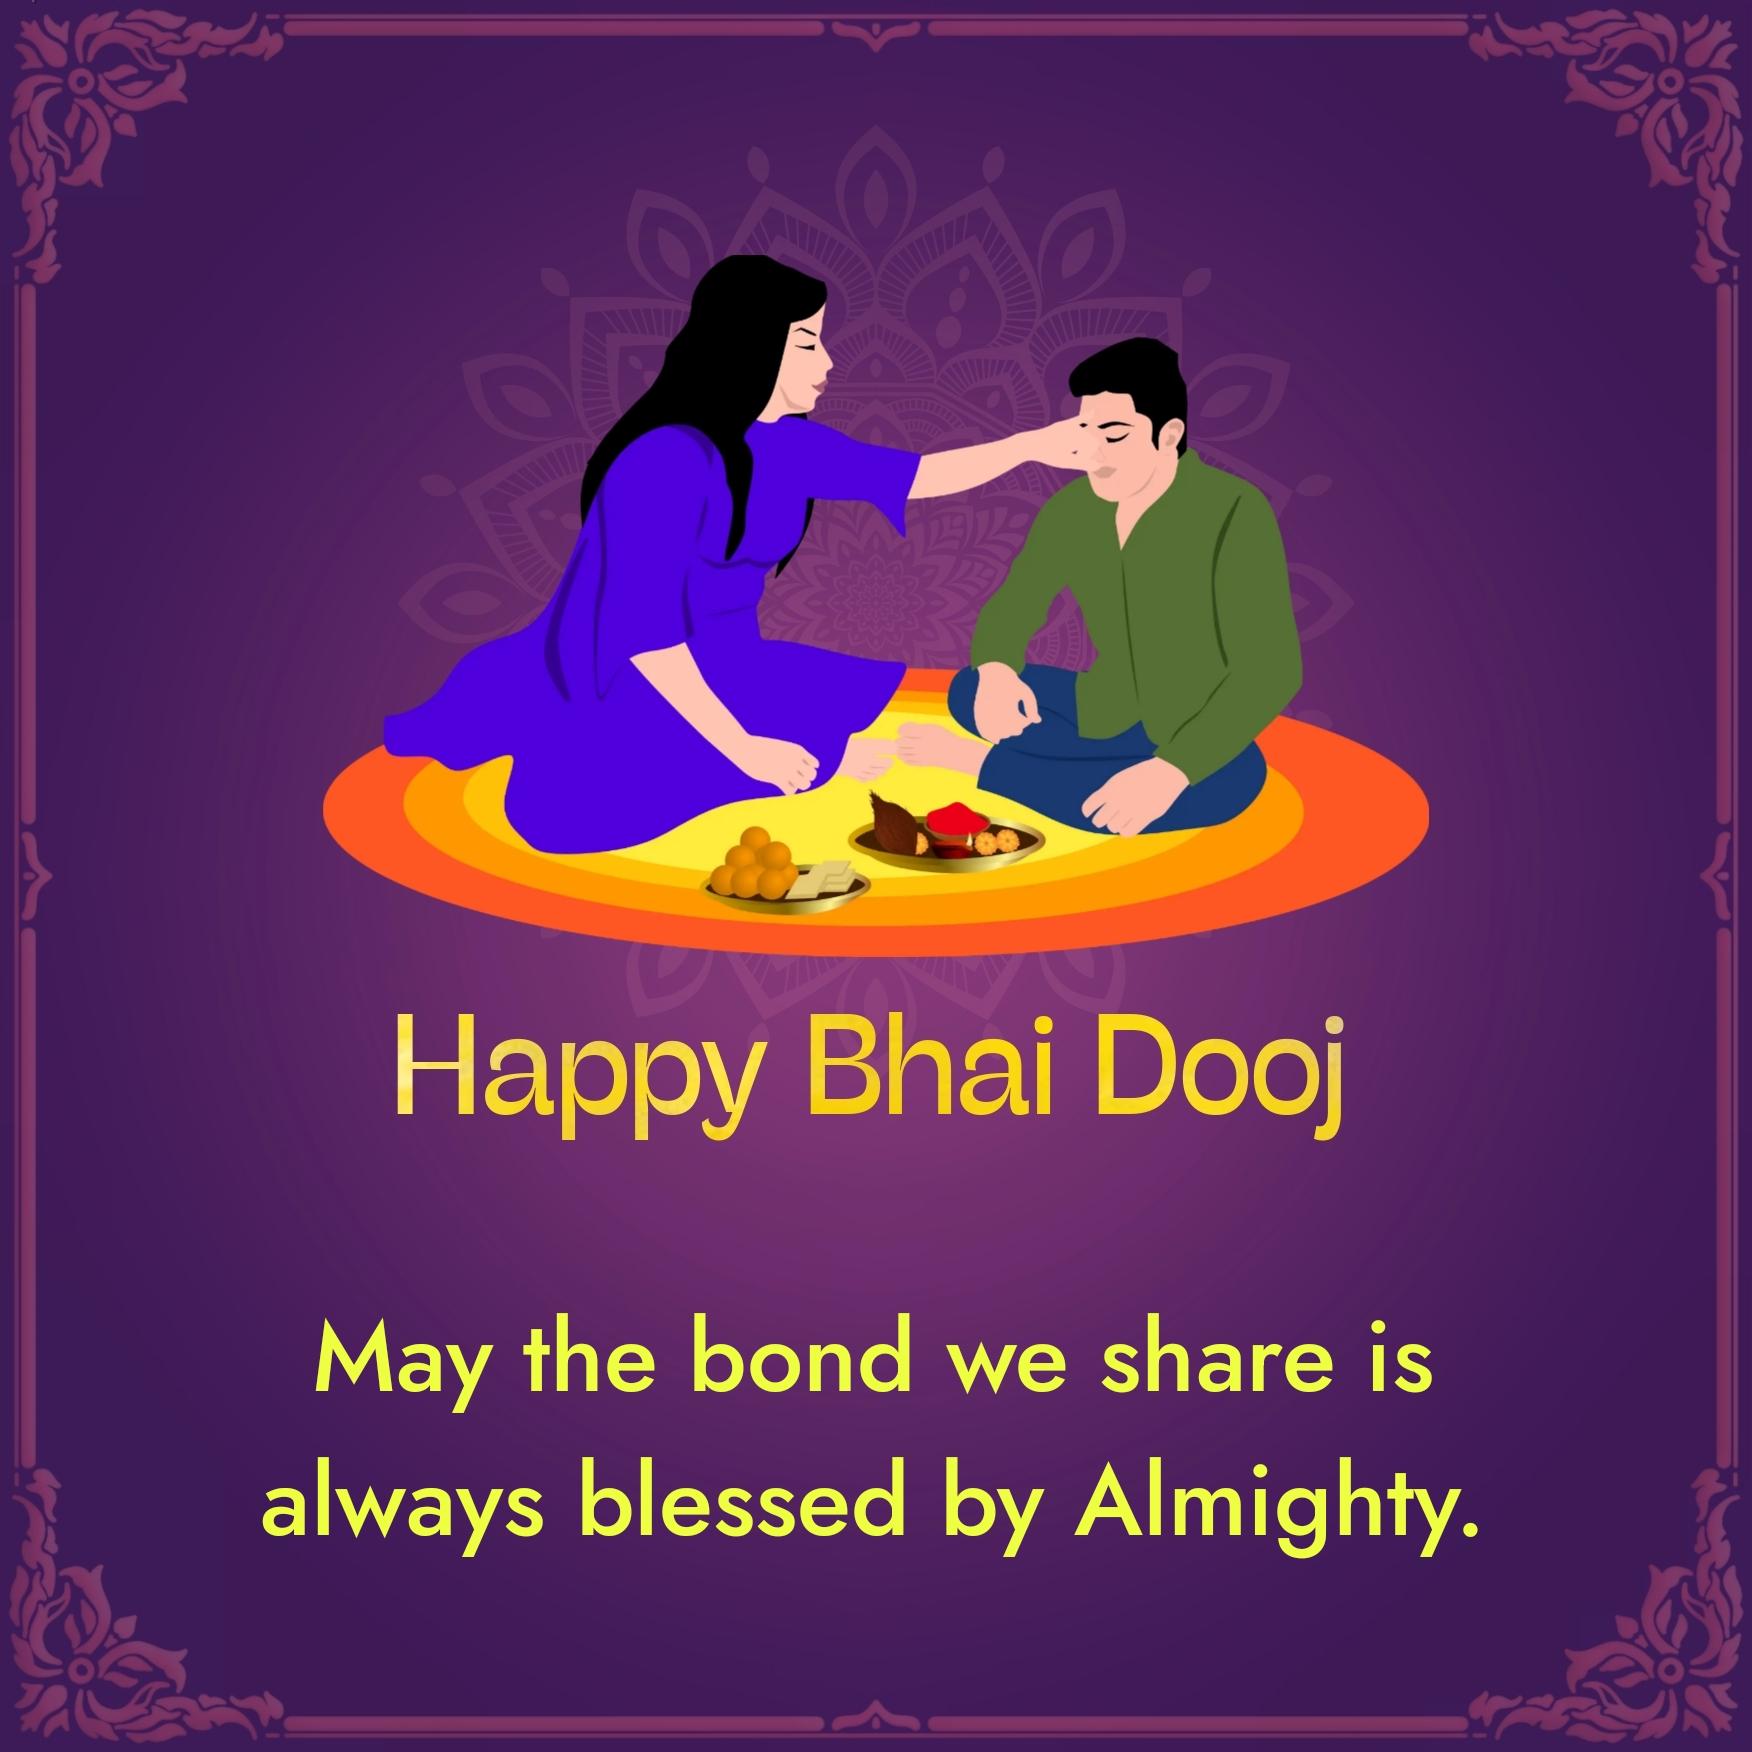 May the bond we share is always blessed by Almighty